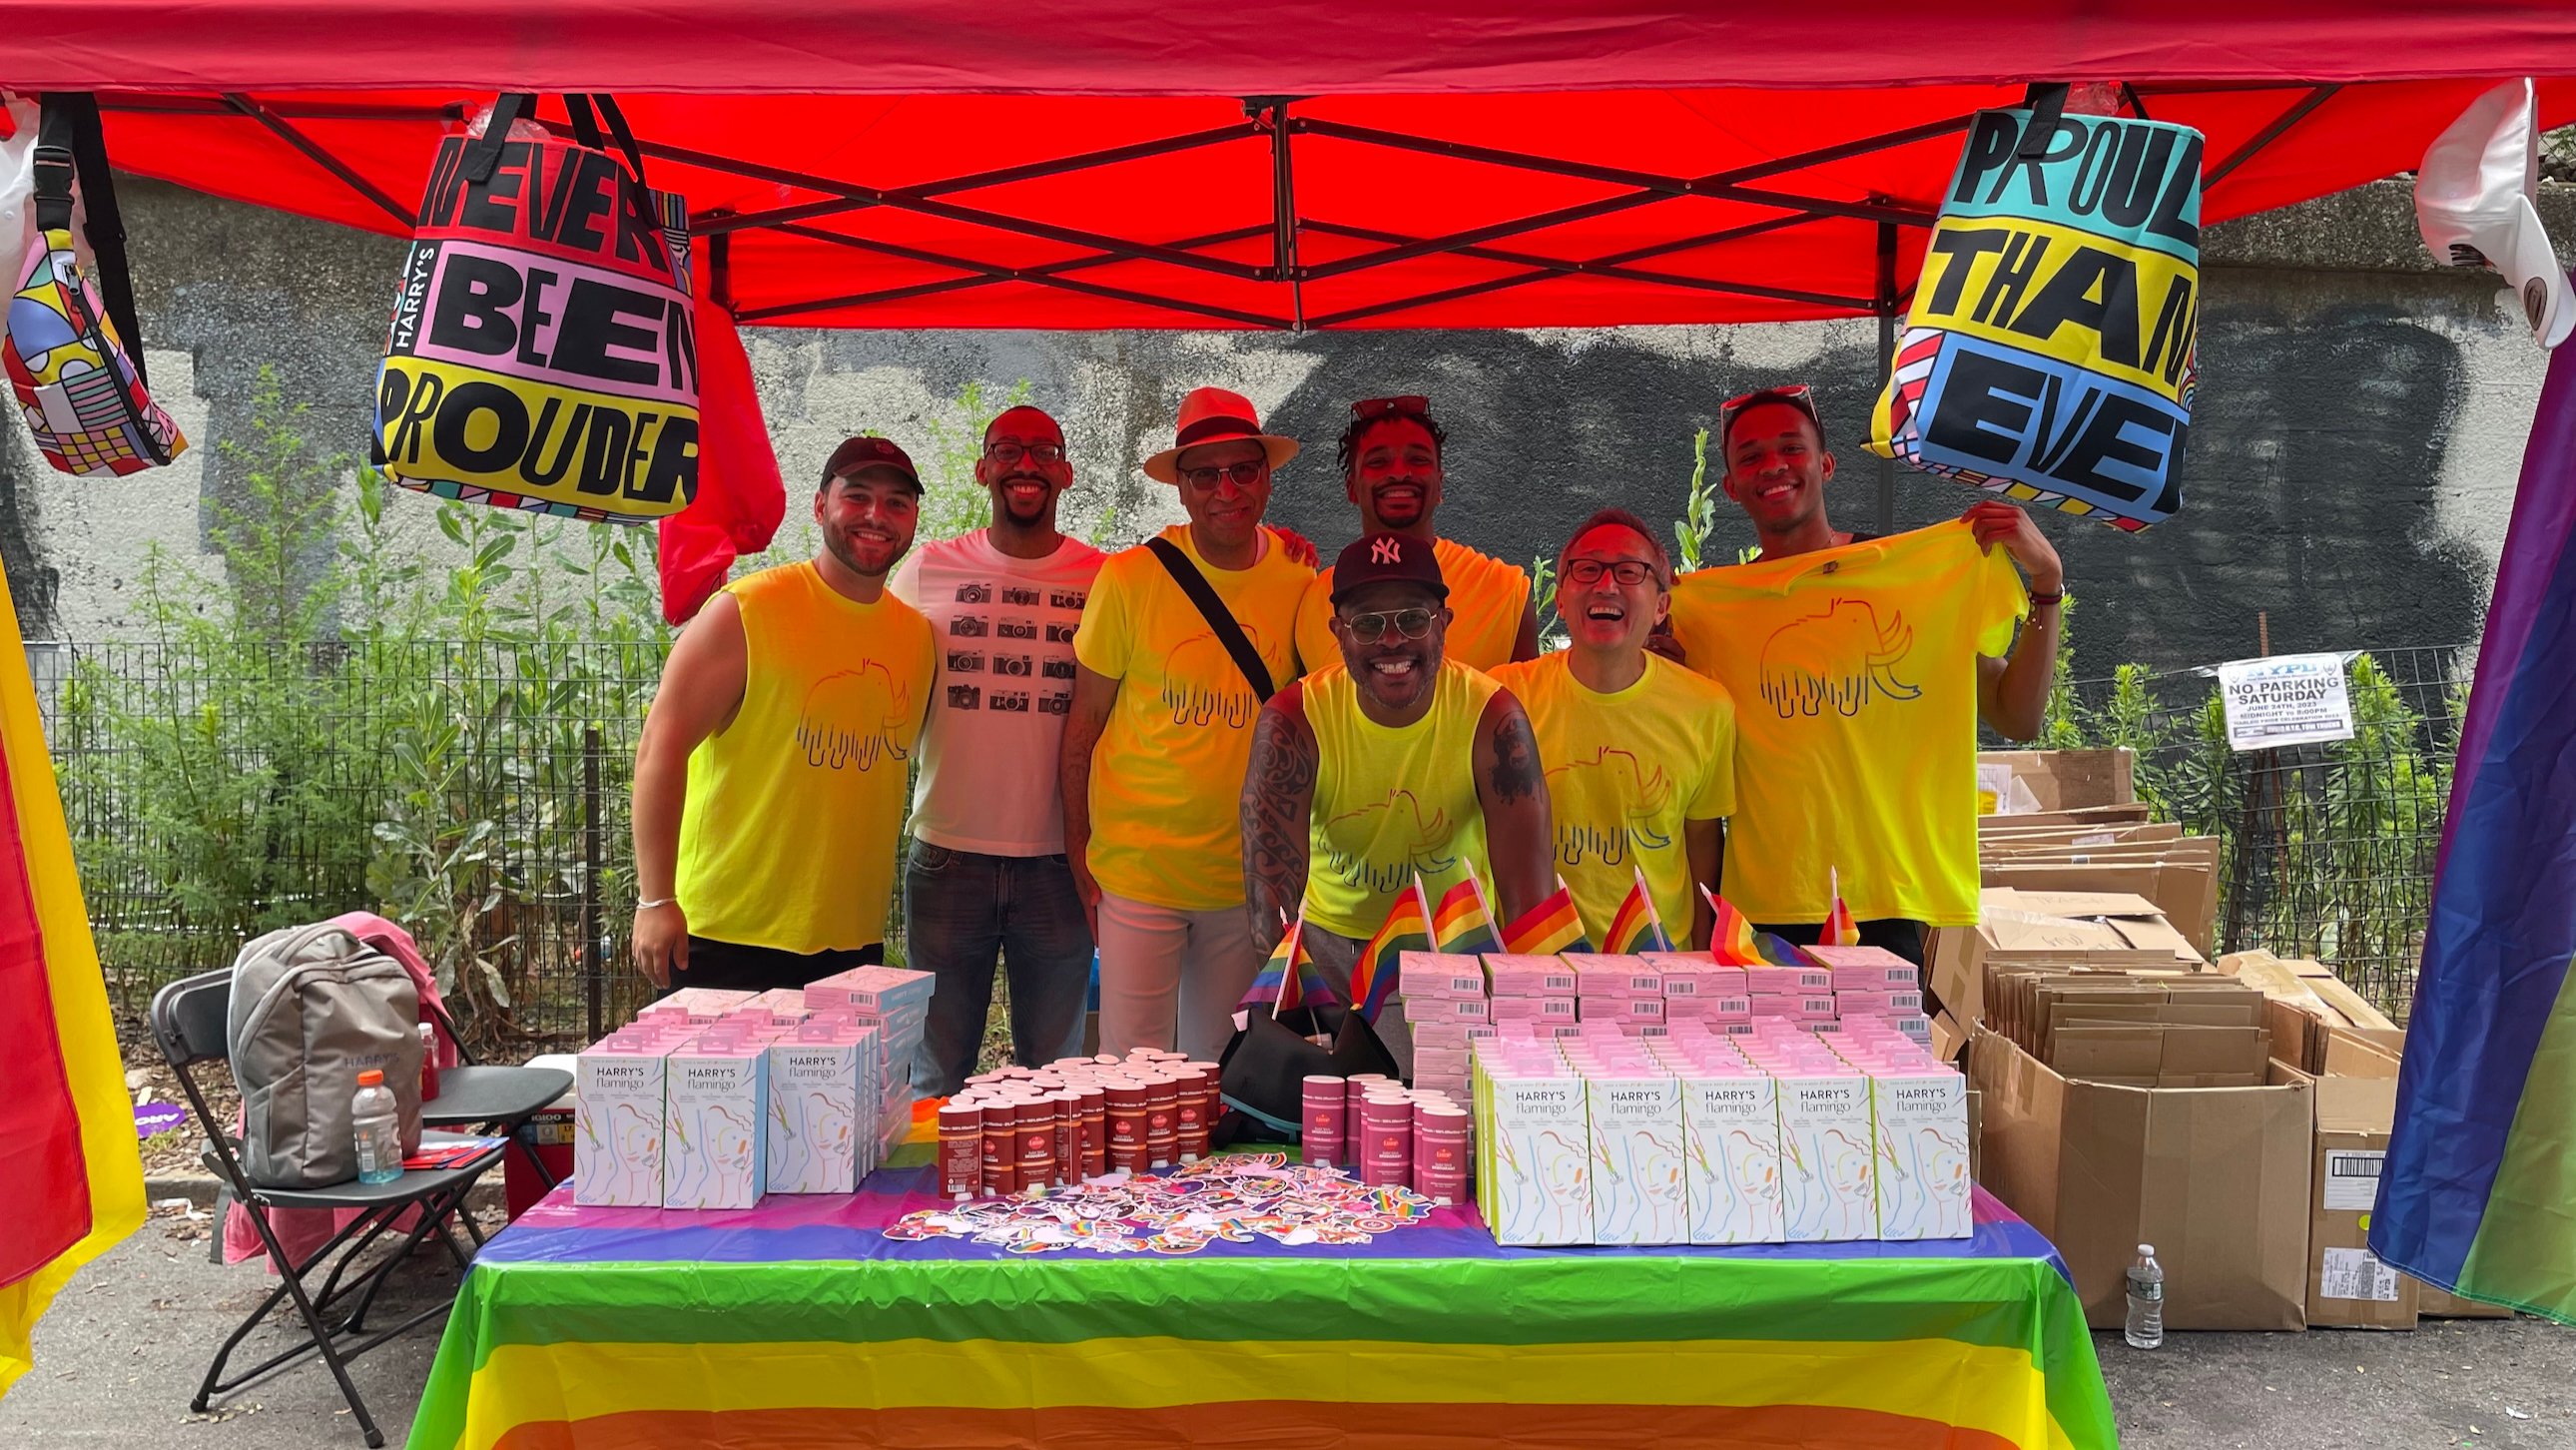  Harry’s employees at a Pride parade booth